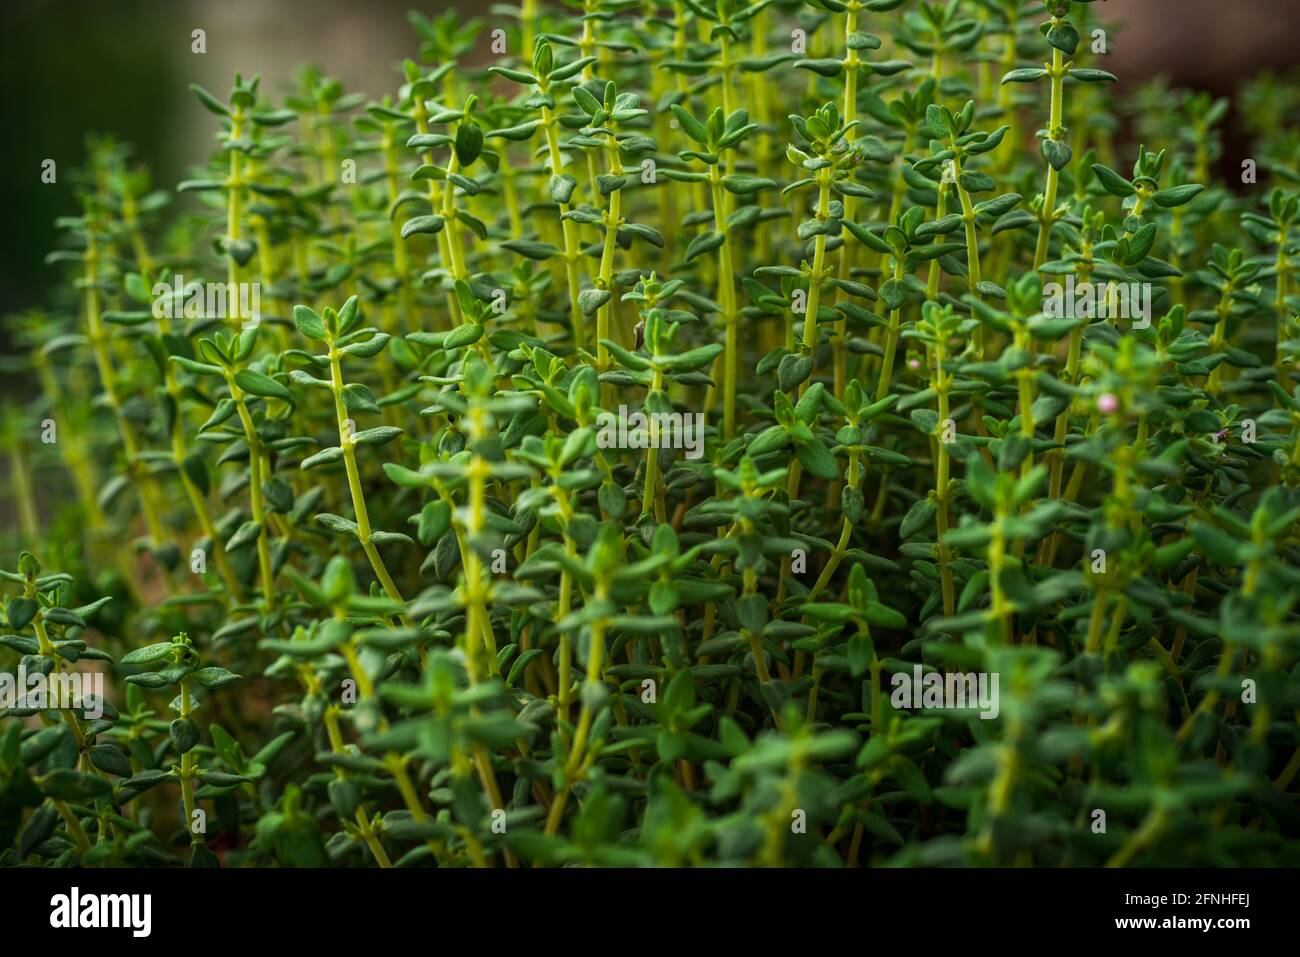 fresh thyme, green, organic cultivation in the garden, close-up view,garden concept background . Stock Photo